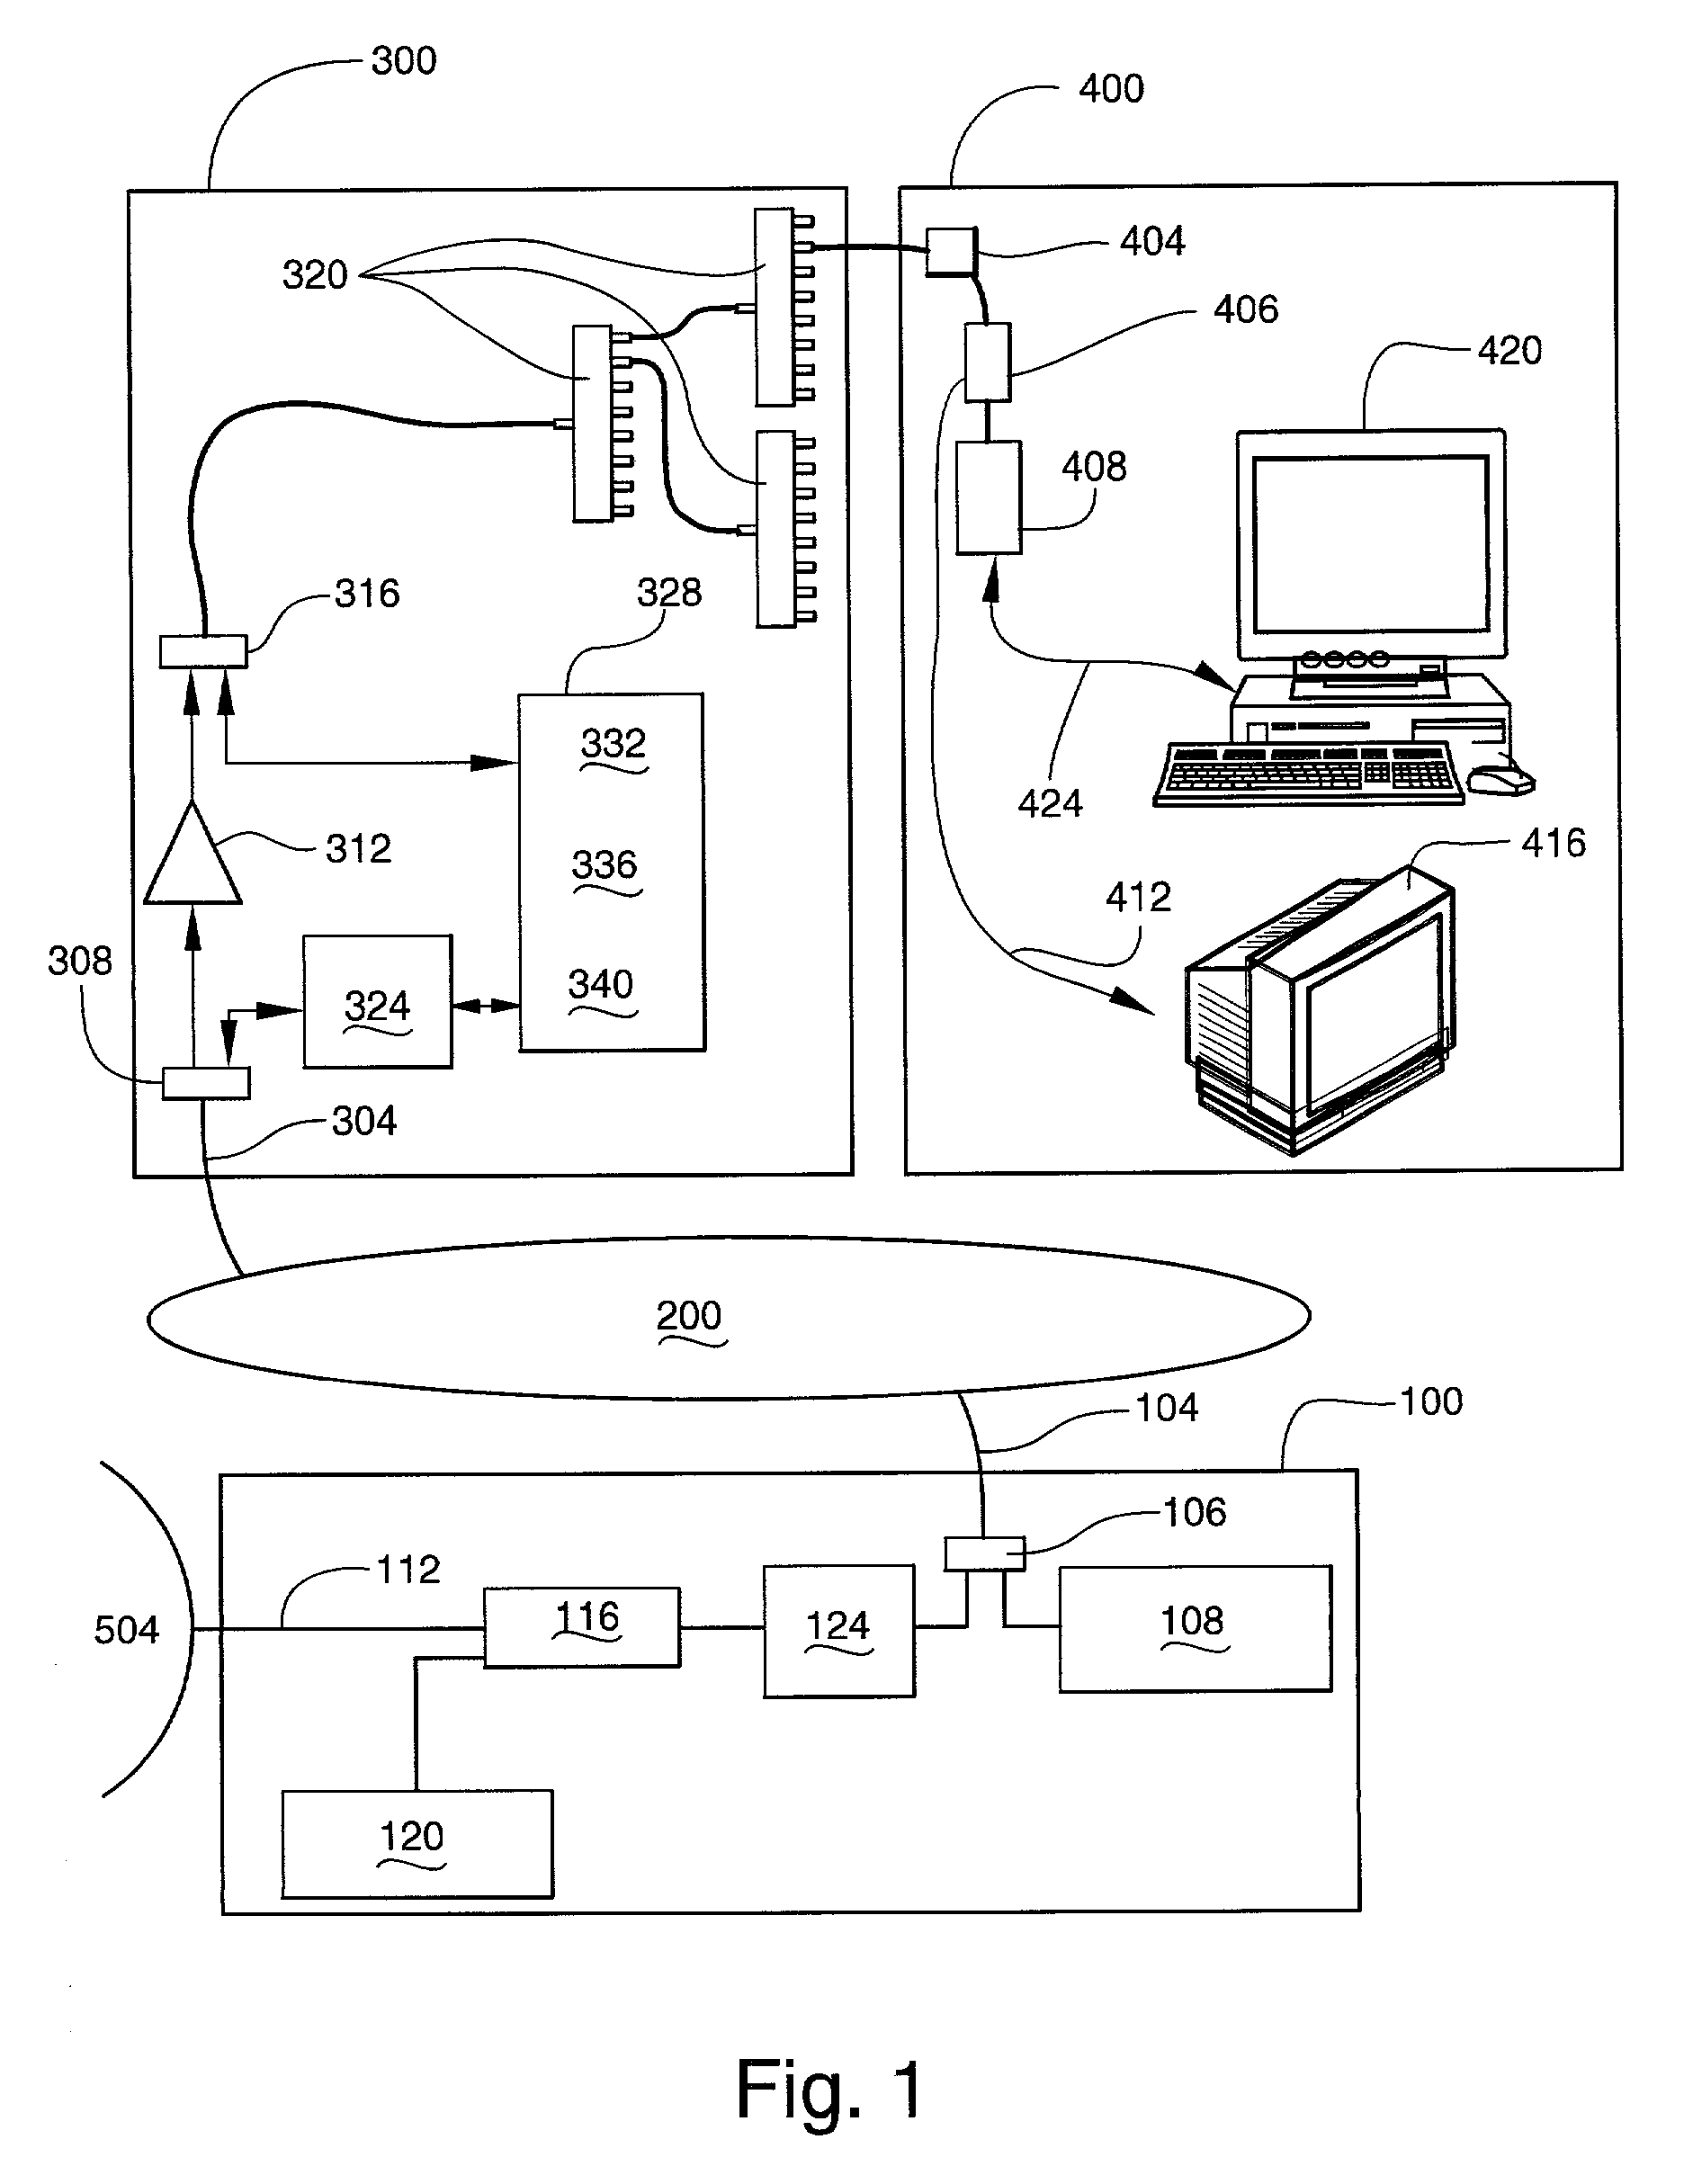 Capacity scaling and functional element redistribution within an in-building coax cable internet Access system